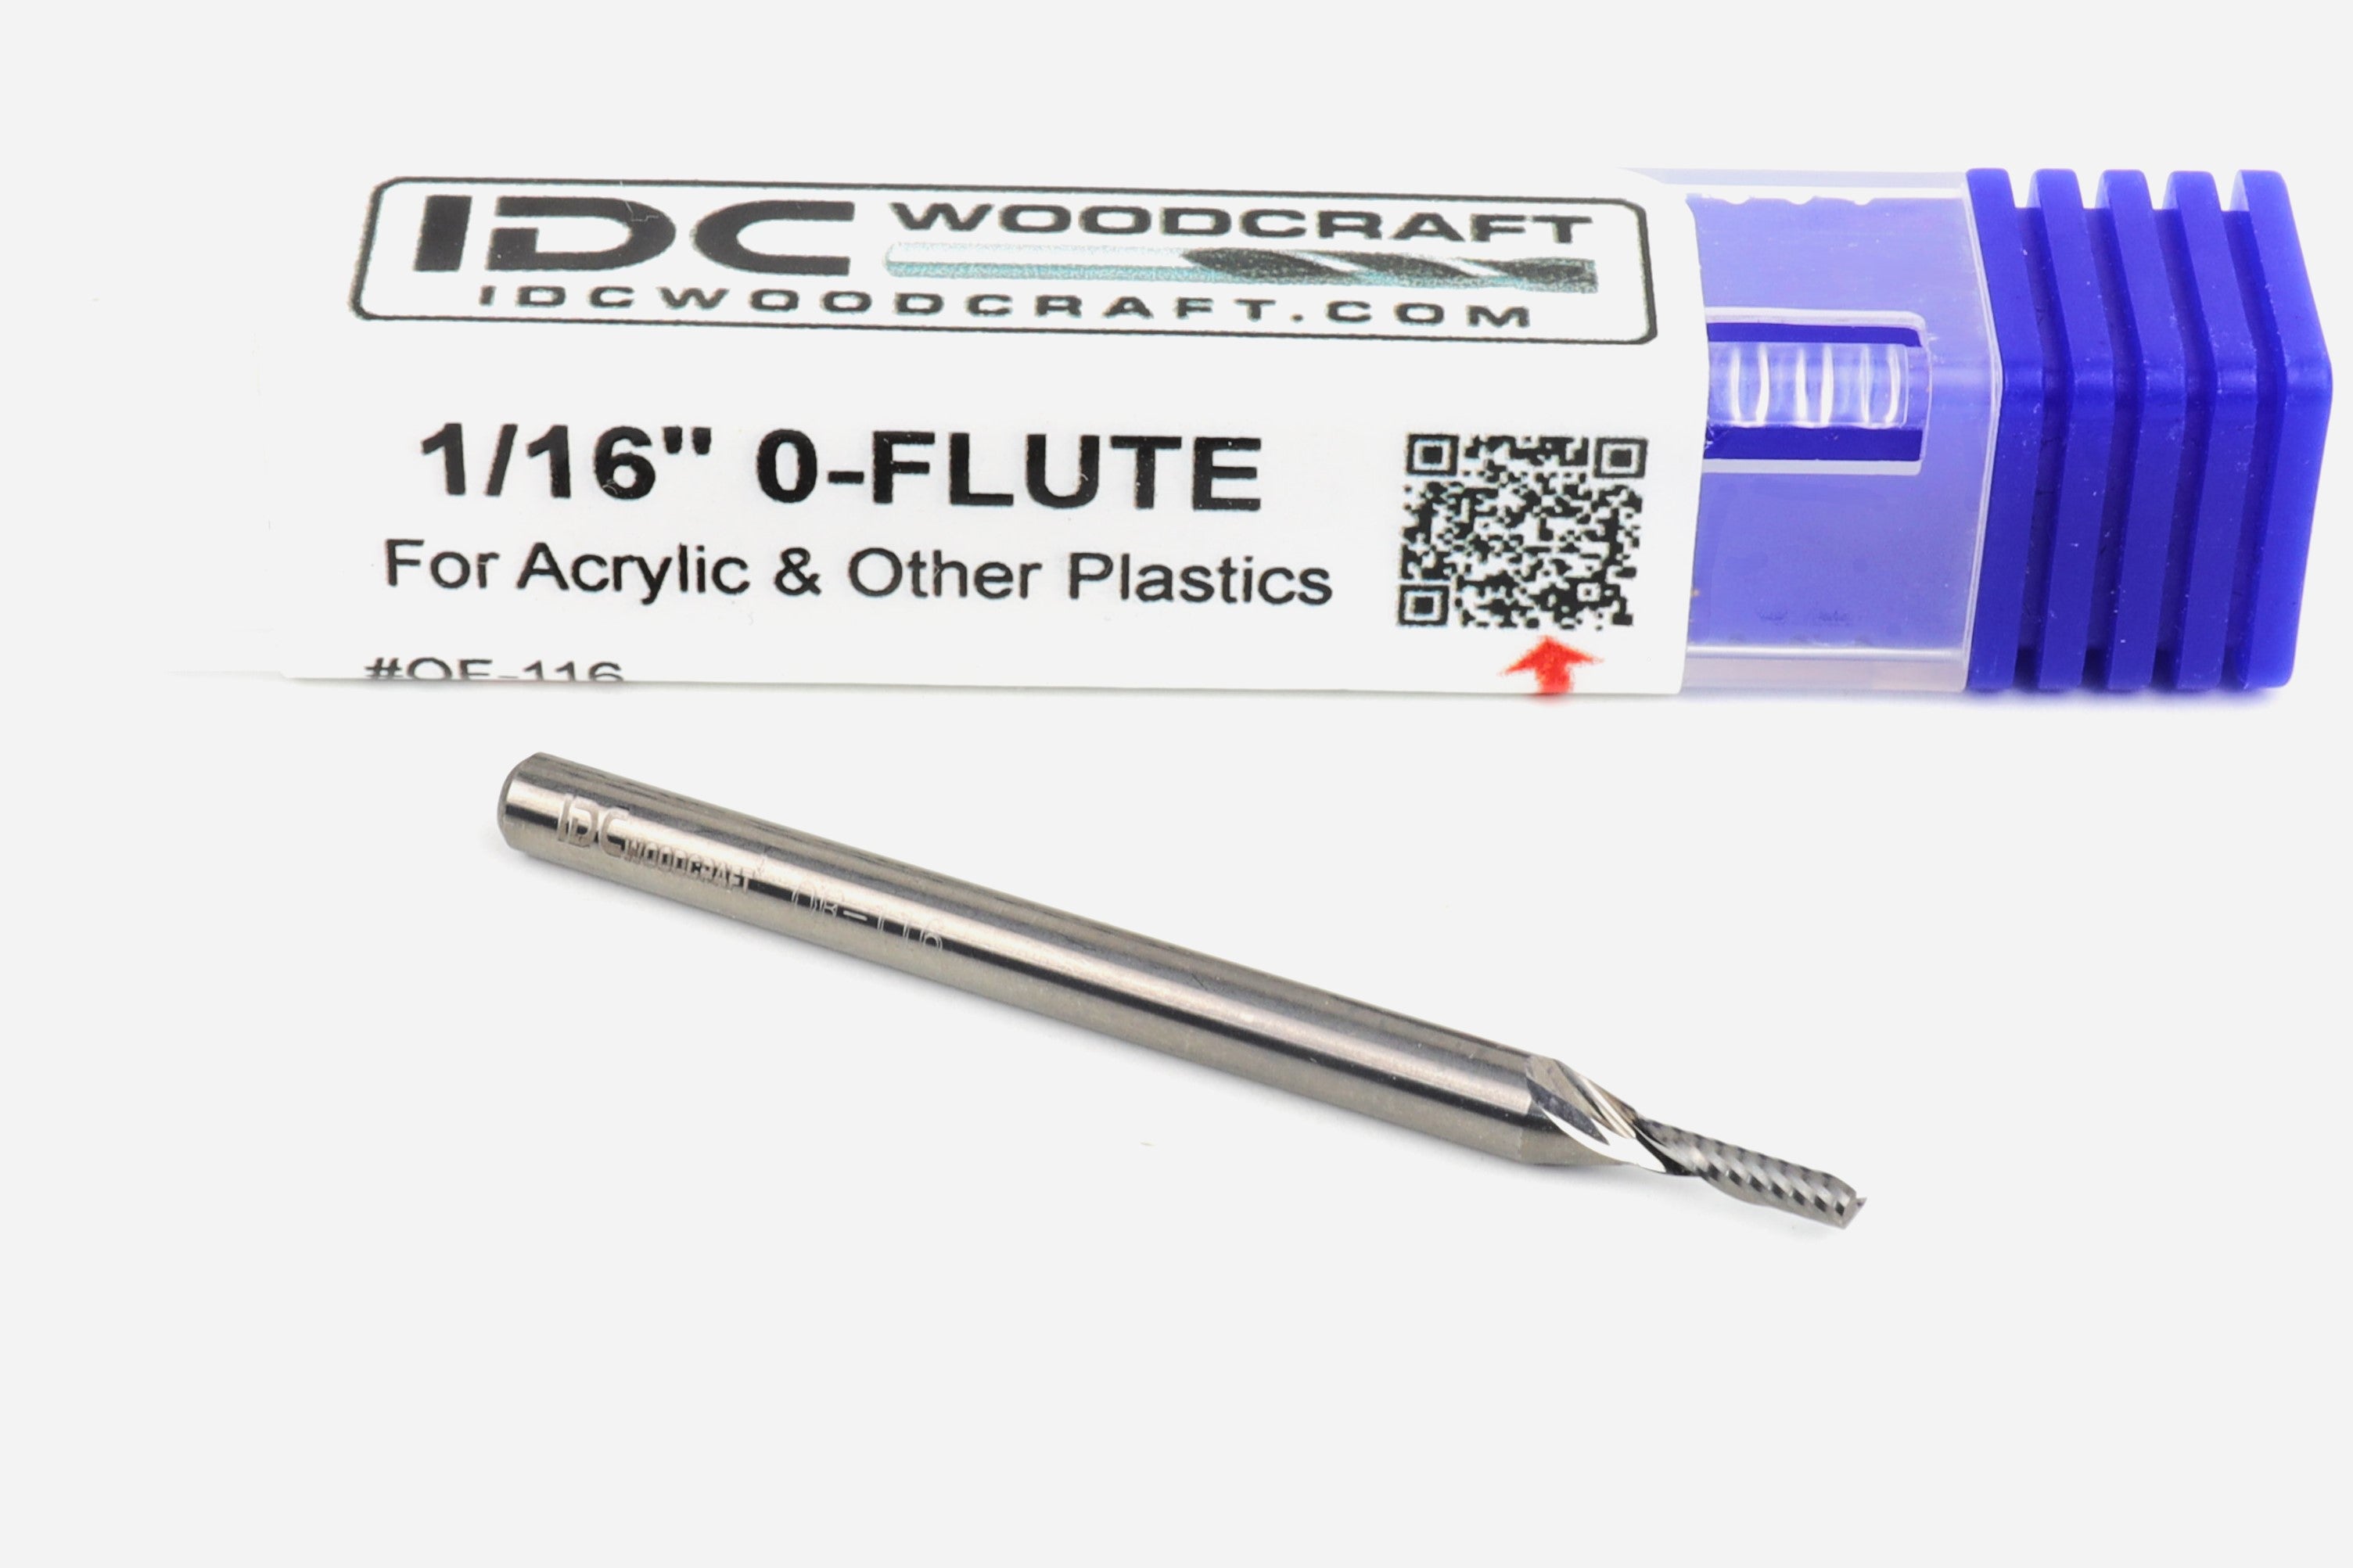 1/16" Acrylic Router Bit For For CNC Routers, 1/8" Shank